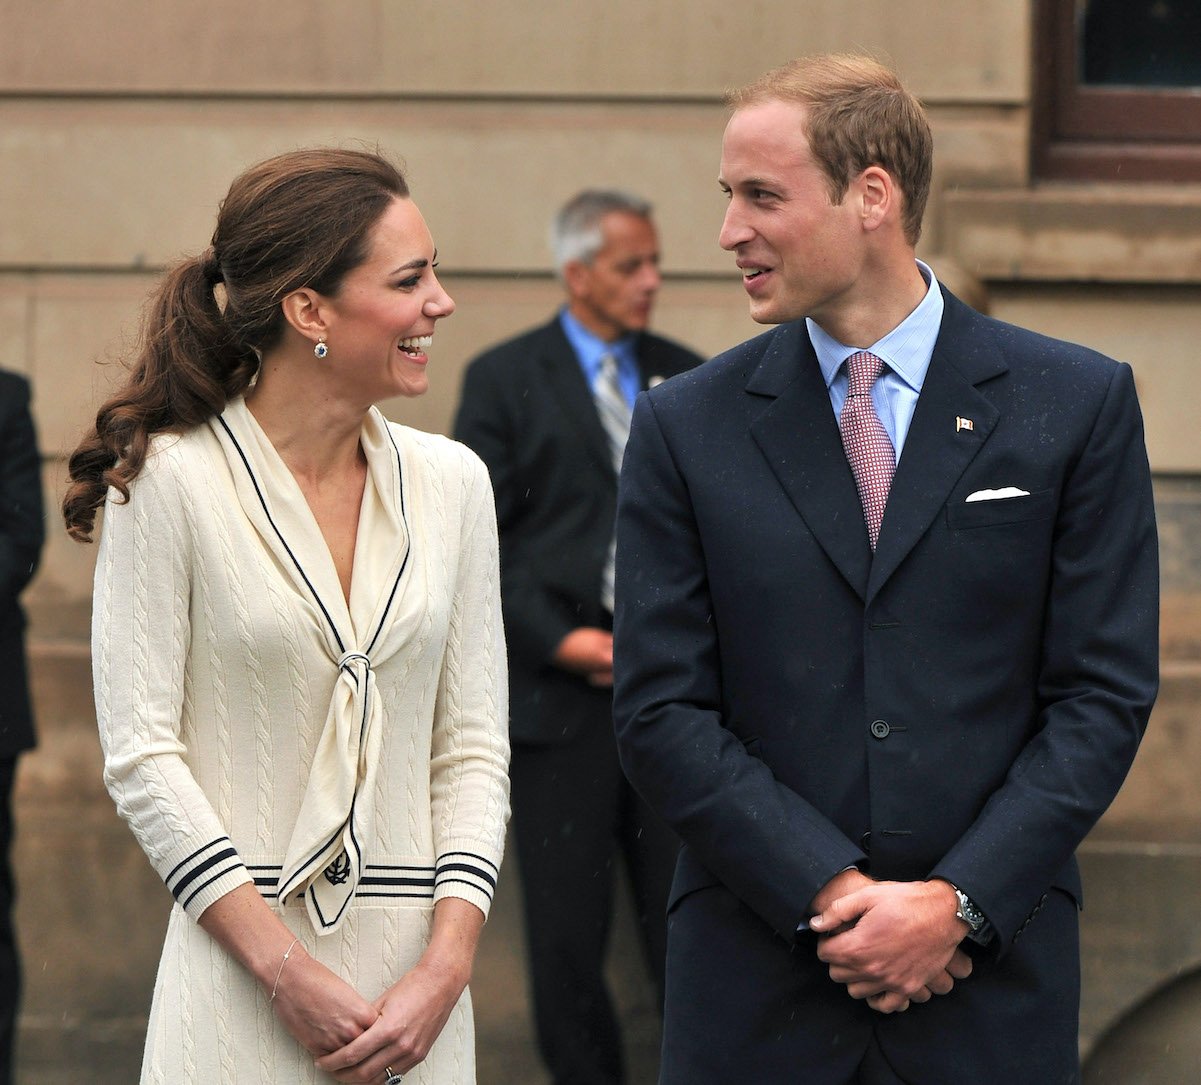 Prince William and Kate Middleton can't stop smiling at each other at an event in 2011